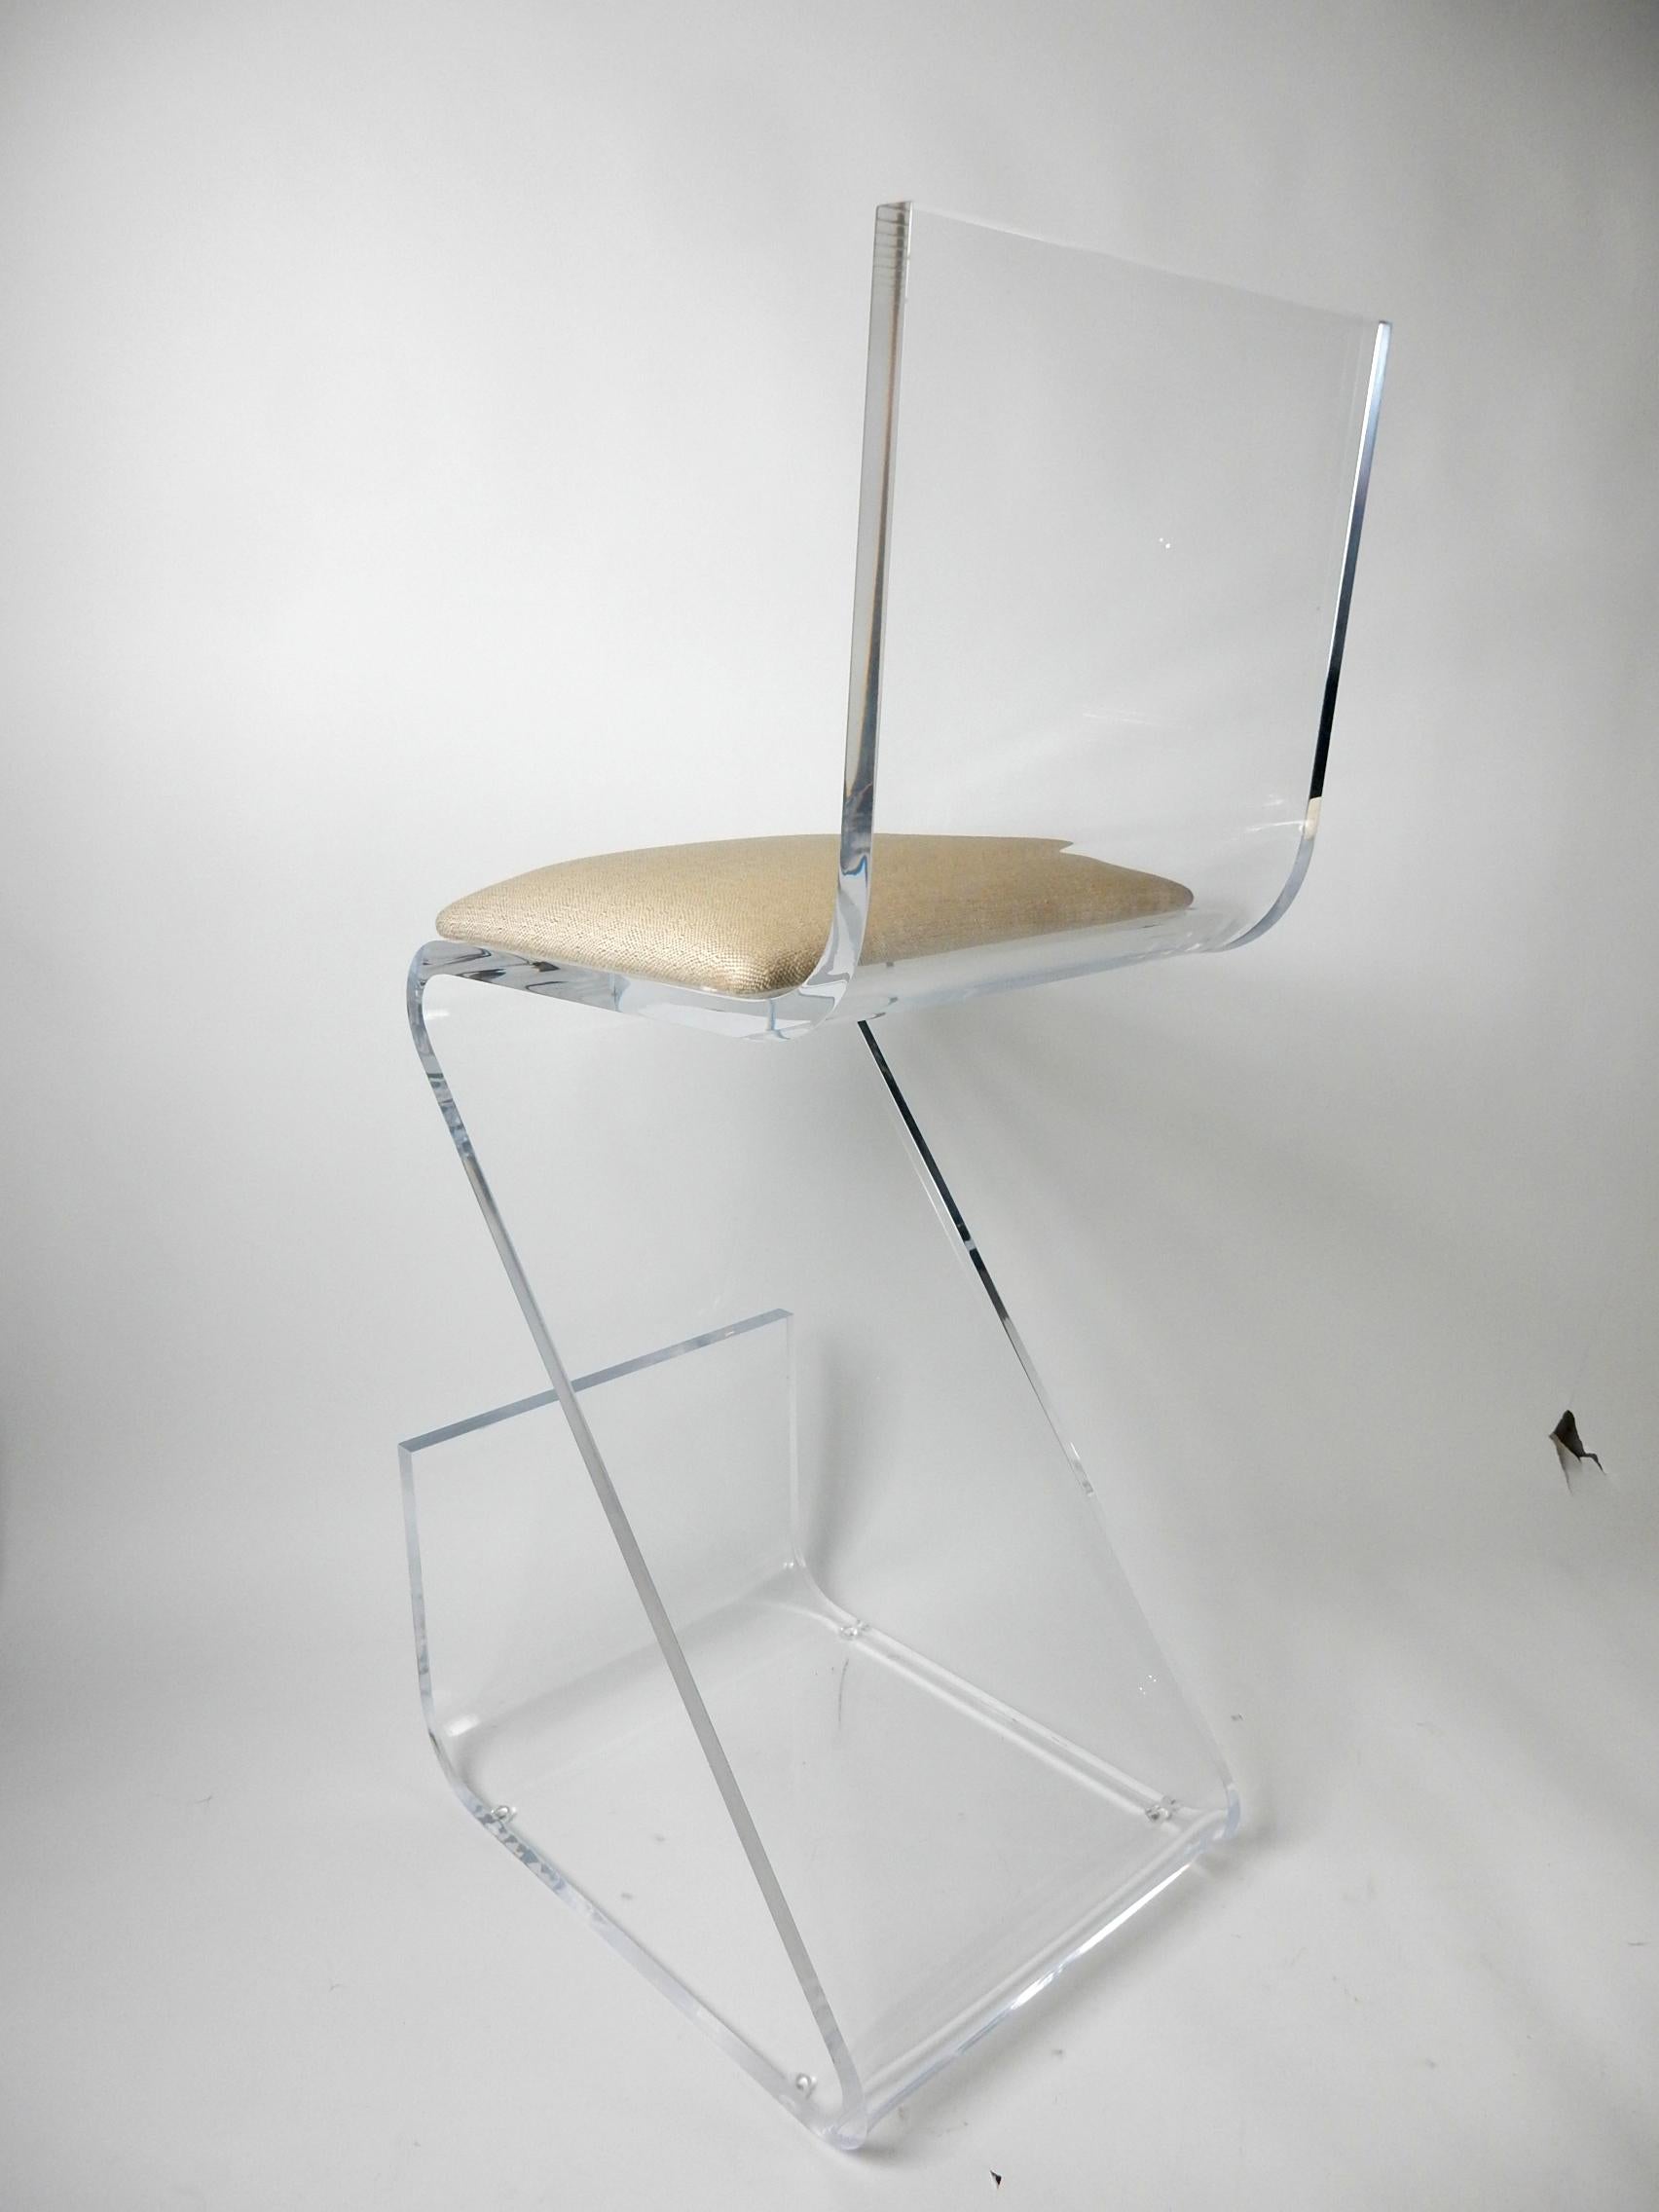 Upholstery Signed Artist Shlomi Haziza Lucite Sculpture Z Barstools, 8 Available For Sale